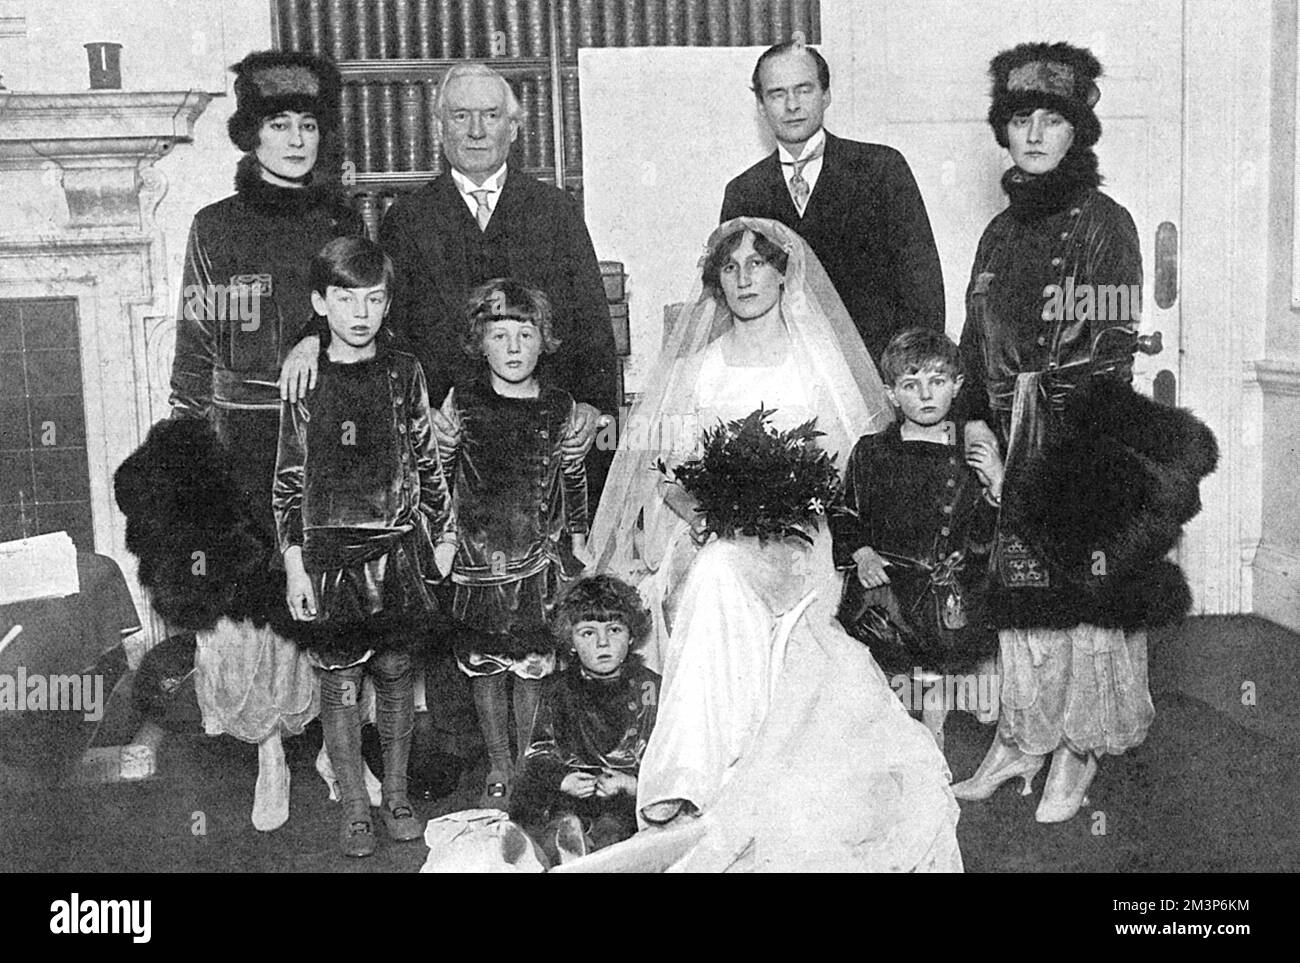 Wedding group at the marriage of Violet Asquith to Maurice Bonham-Carter.  Helen Violet Bonham Carter, Baroness Asquith of Yarnbury, DBE (15 April 1887  19 February 1969) was a British politician and diarist. She was the daughter of H. H. Asquith, Prime Minister from 19081916, and later became active in Liberal politics herself, being a leading opponent of appeasement, standing for Parliament and being made a life peer. She was also involved in arts and literature. Her illuminating diaries cover her father's premiership before and during World War I and continue until the 1960s.  She was a clo Stock Photo